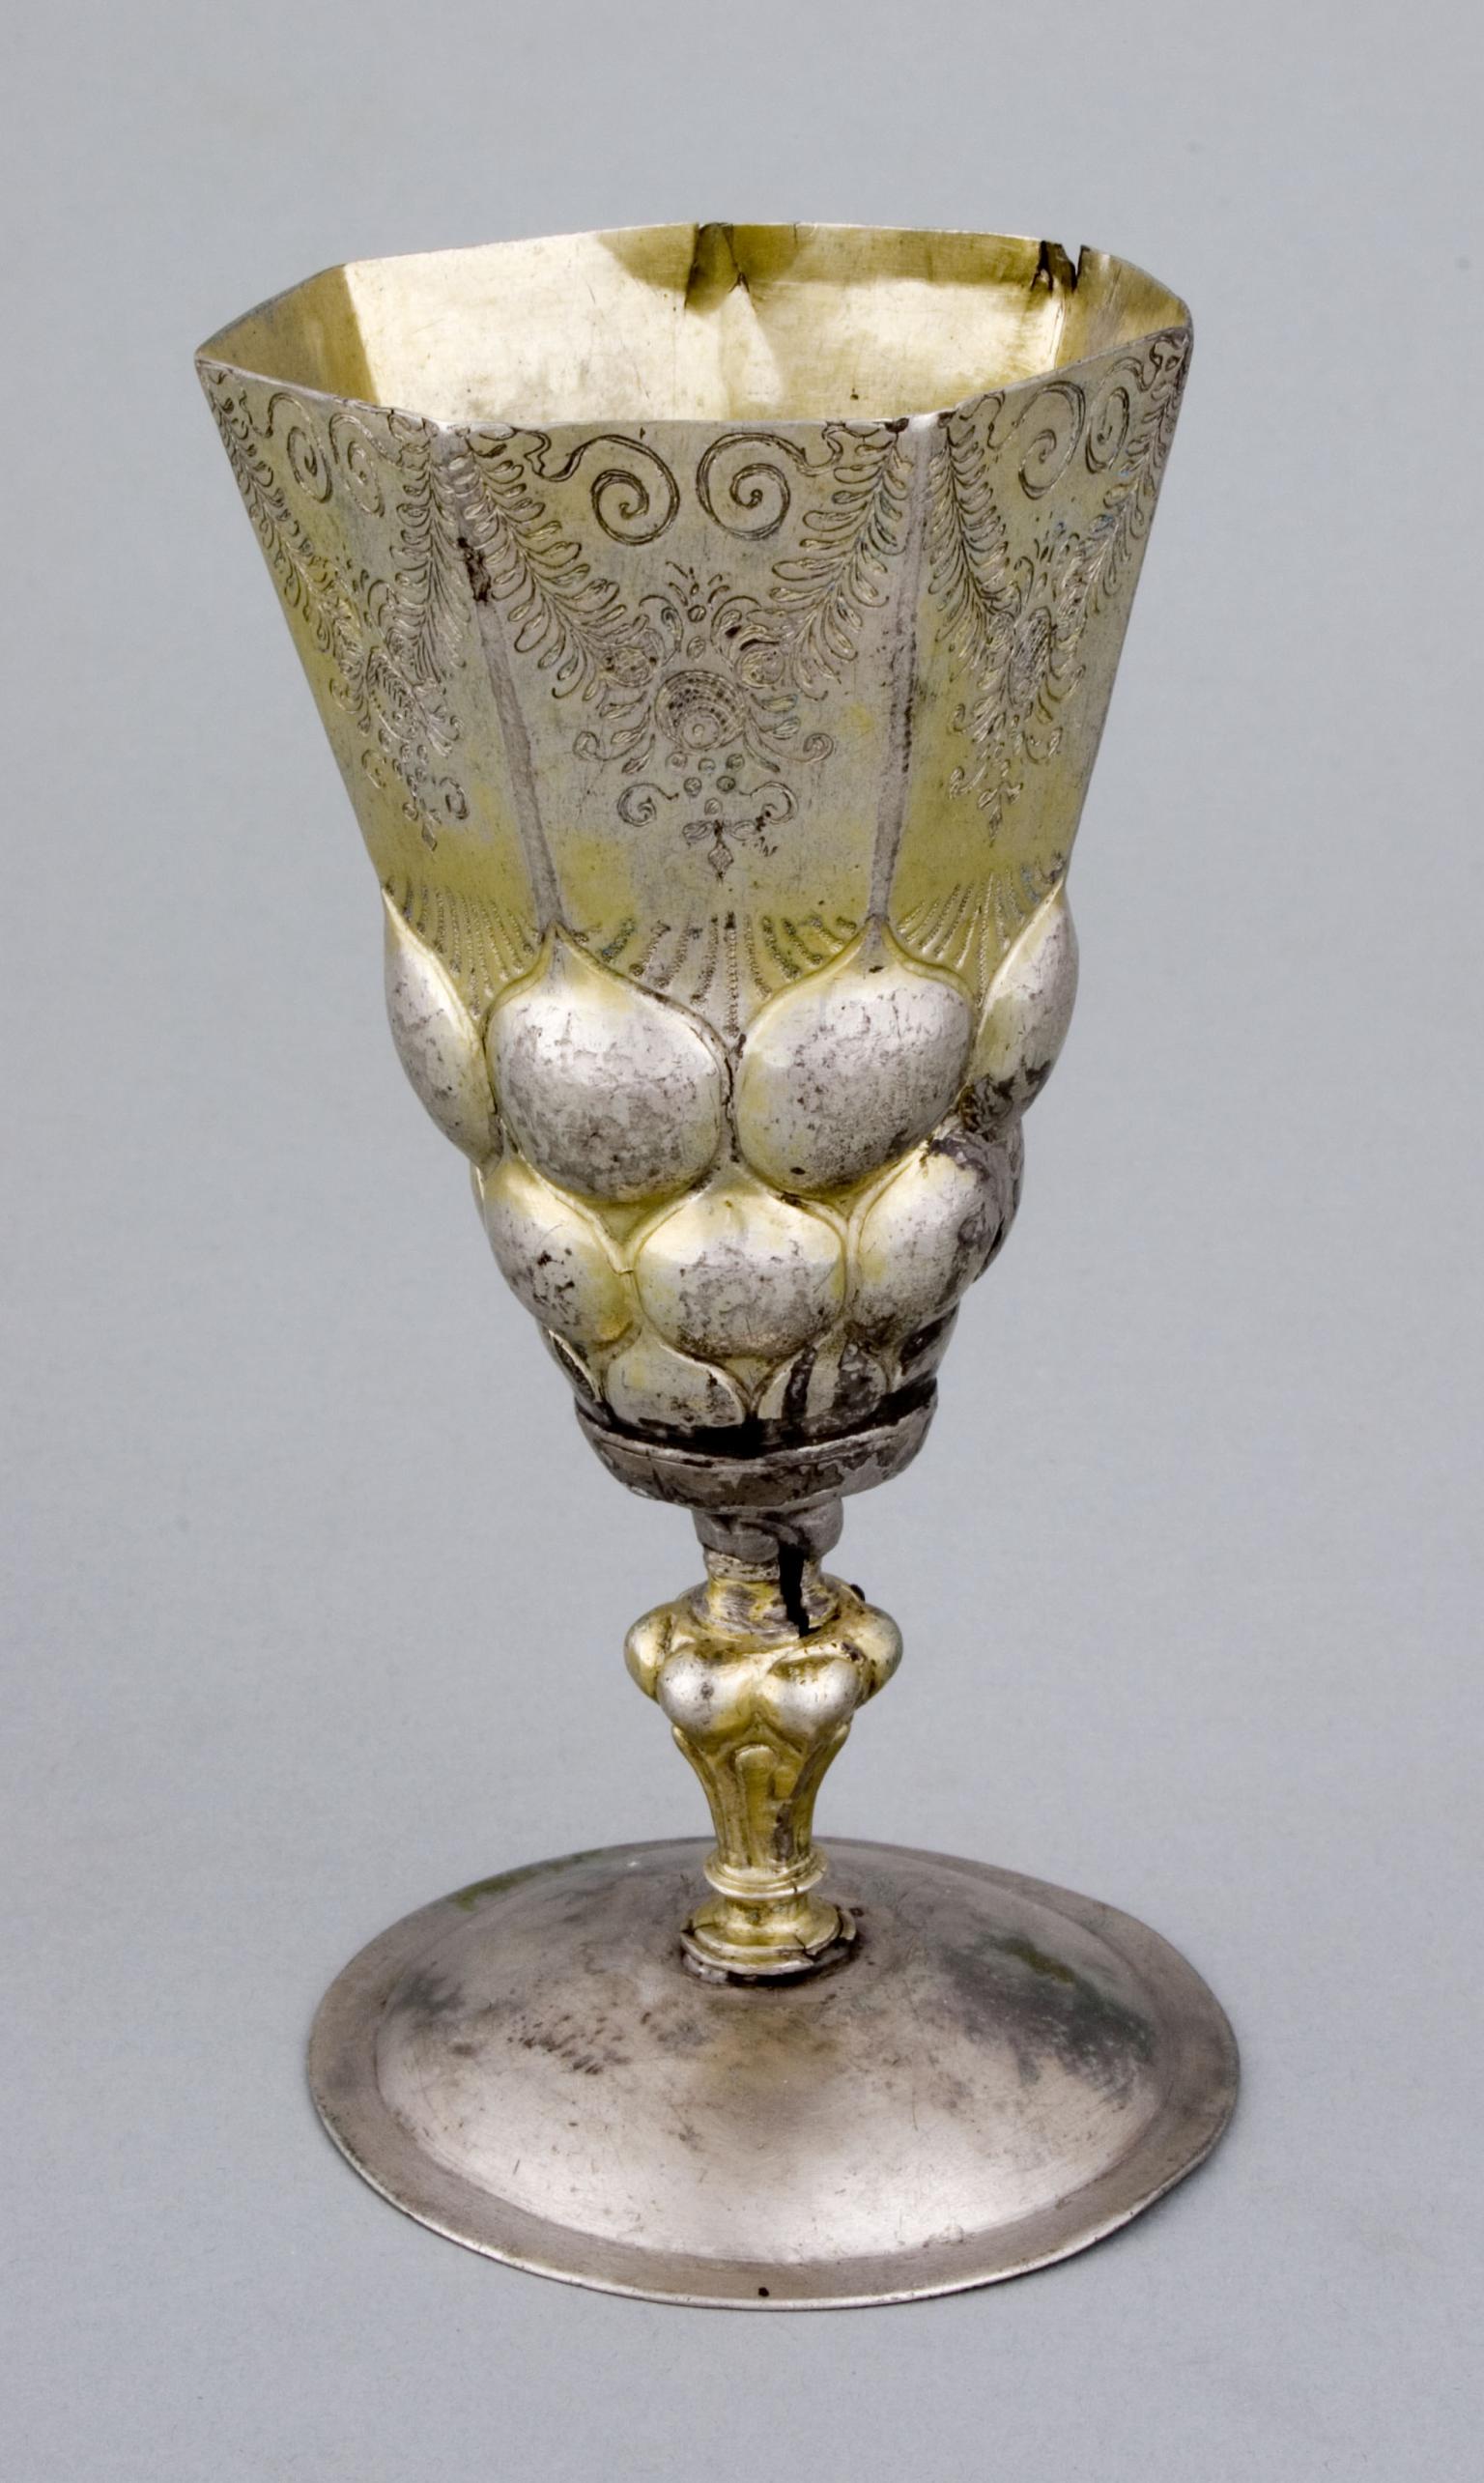 Cup engraved with floral motifs.